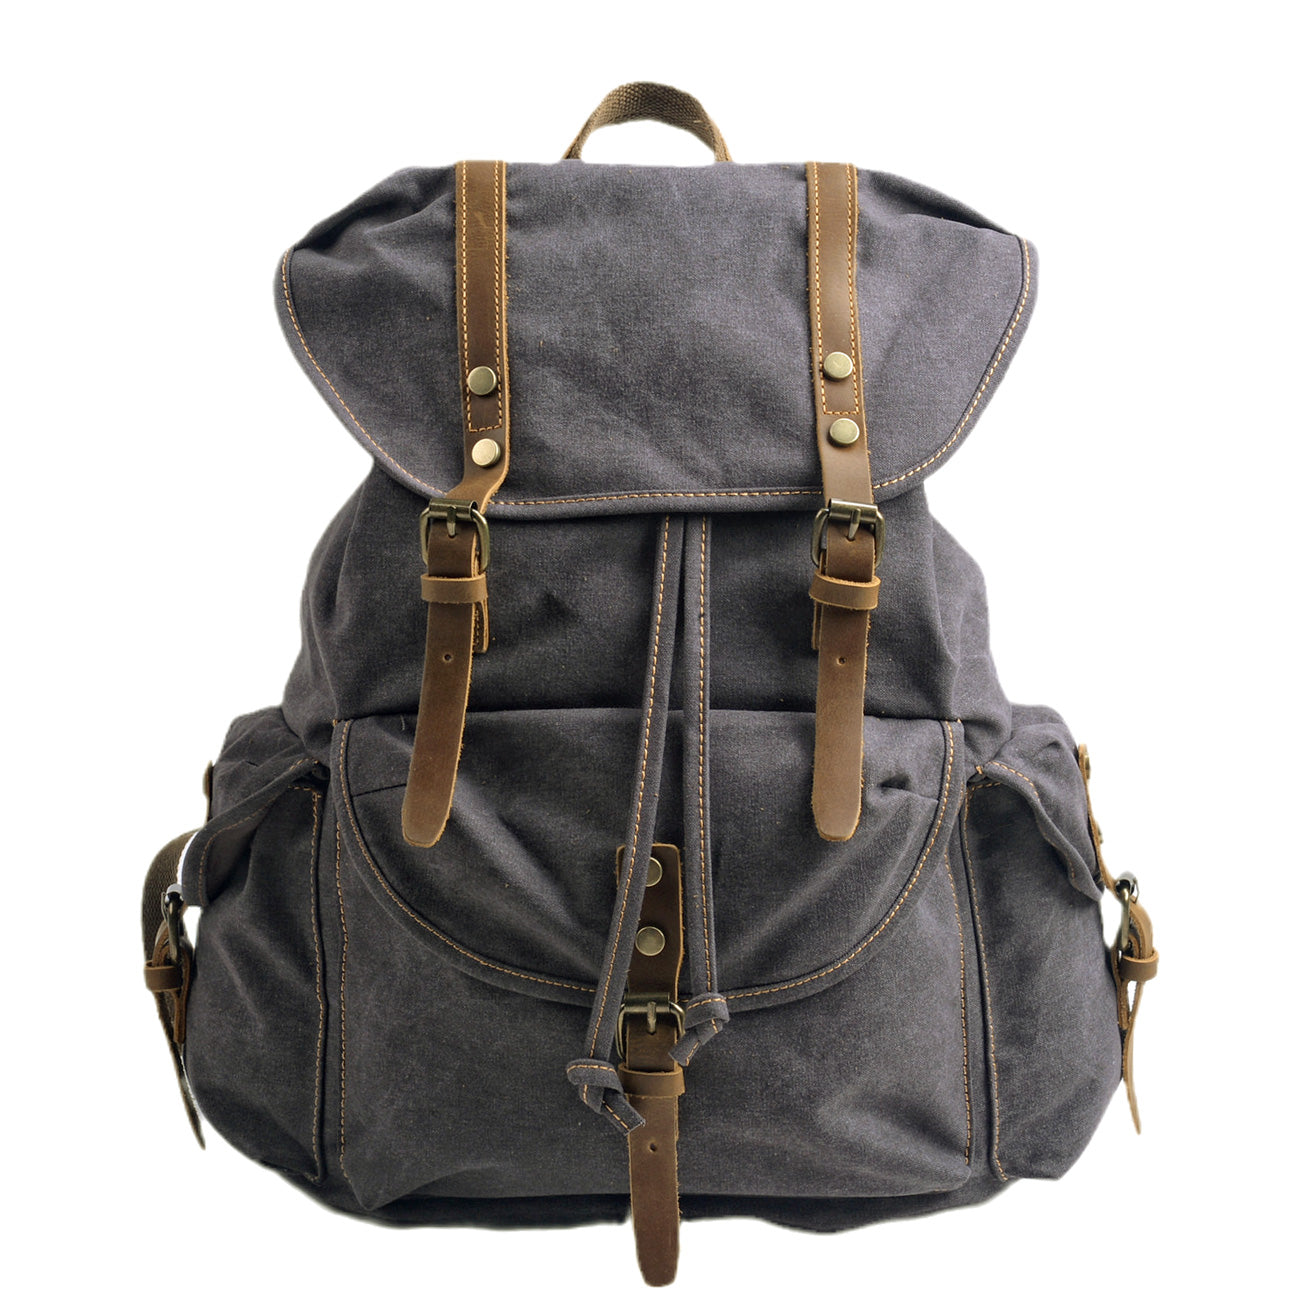 Men's Vintage Leather & Canvas Backpack, Army Green